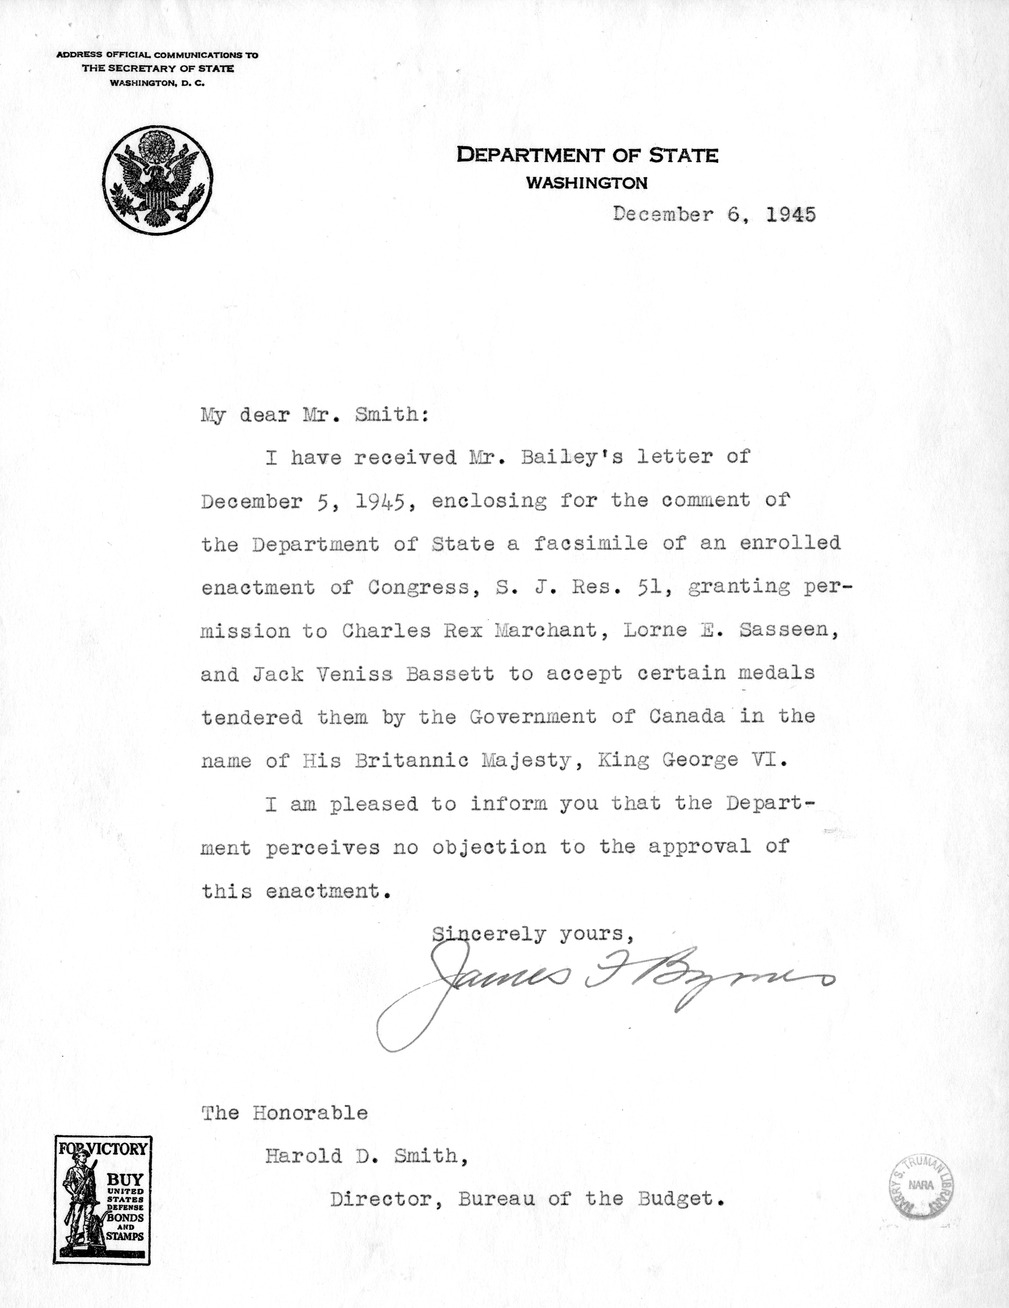 Memorandum from Frederick J. Bailey to M. C. Latta, S.J. Res. 51, Granting Permission to Charles Rex Marchant, Lorne E. Sasseen, and Jack Vaniss Sassett to Accept Certain Medals Tendered Them by the Government of Canada in the Name of His Britannic Majesty, King George VI, with Attachments